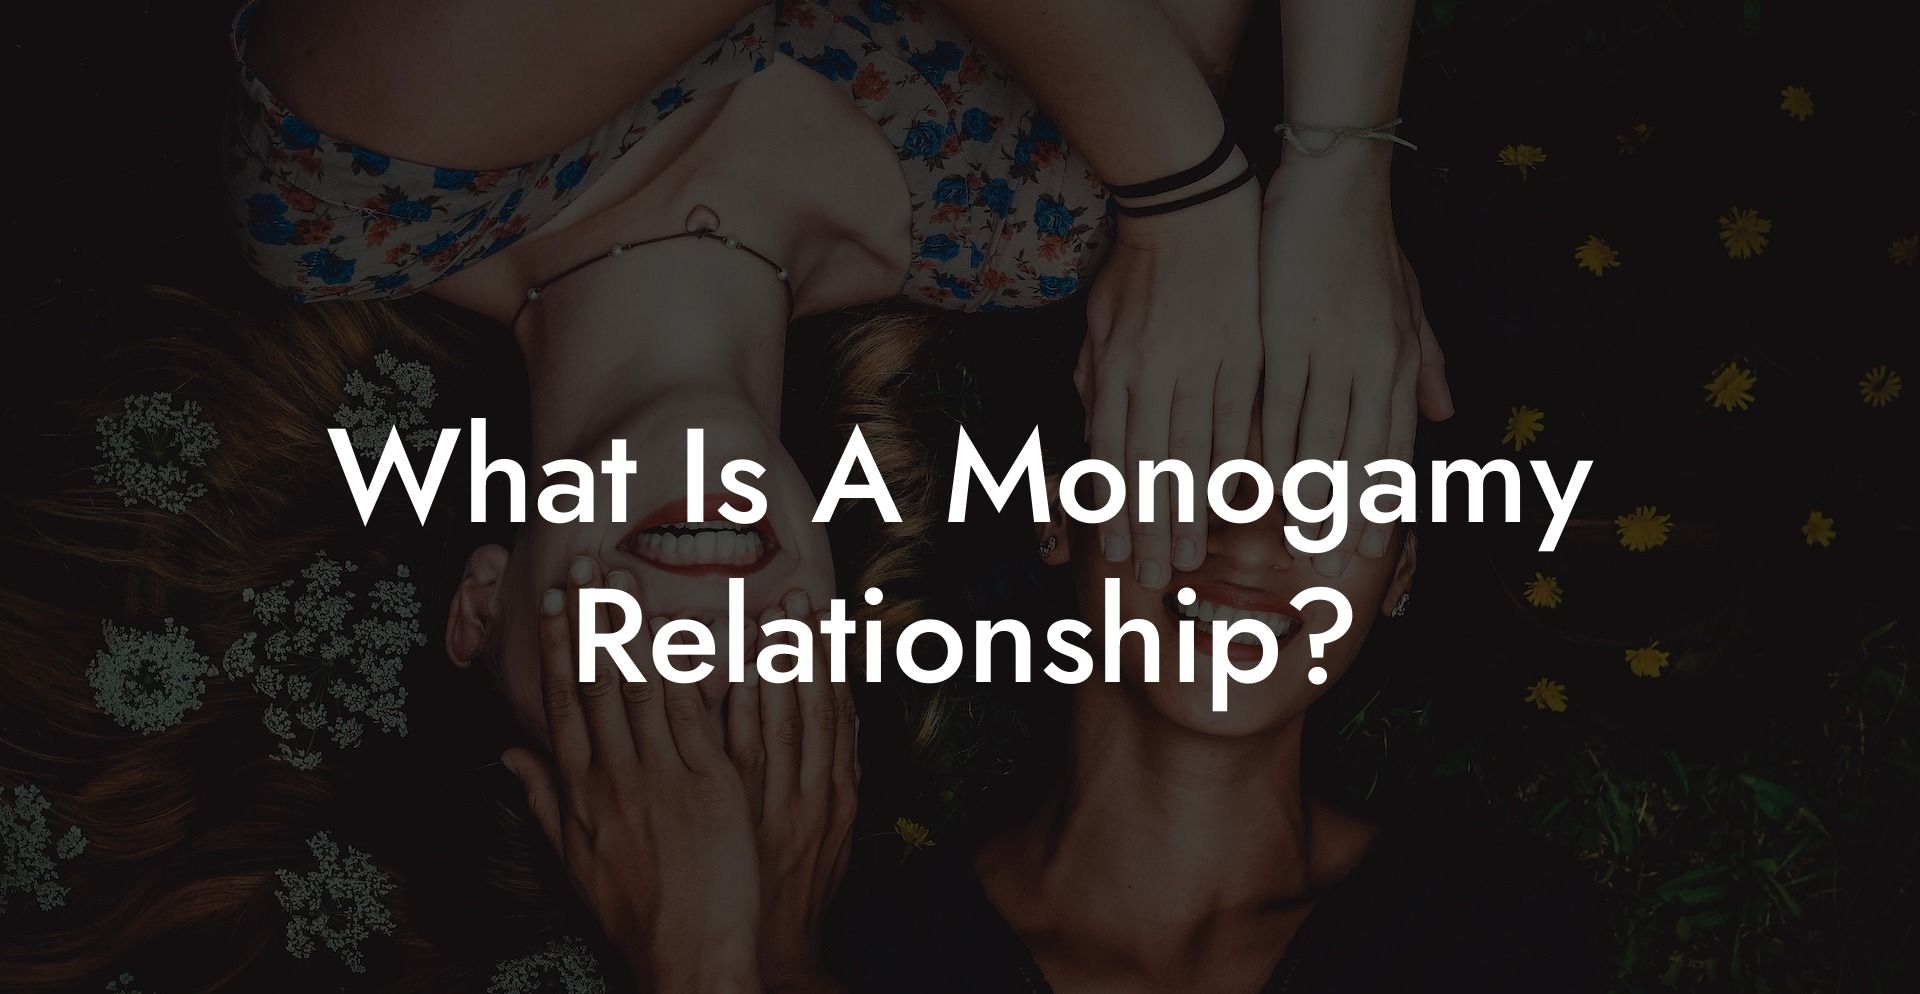 What Is A Monogamy Relationship?